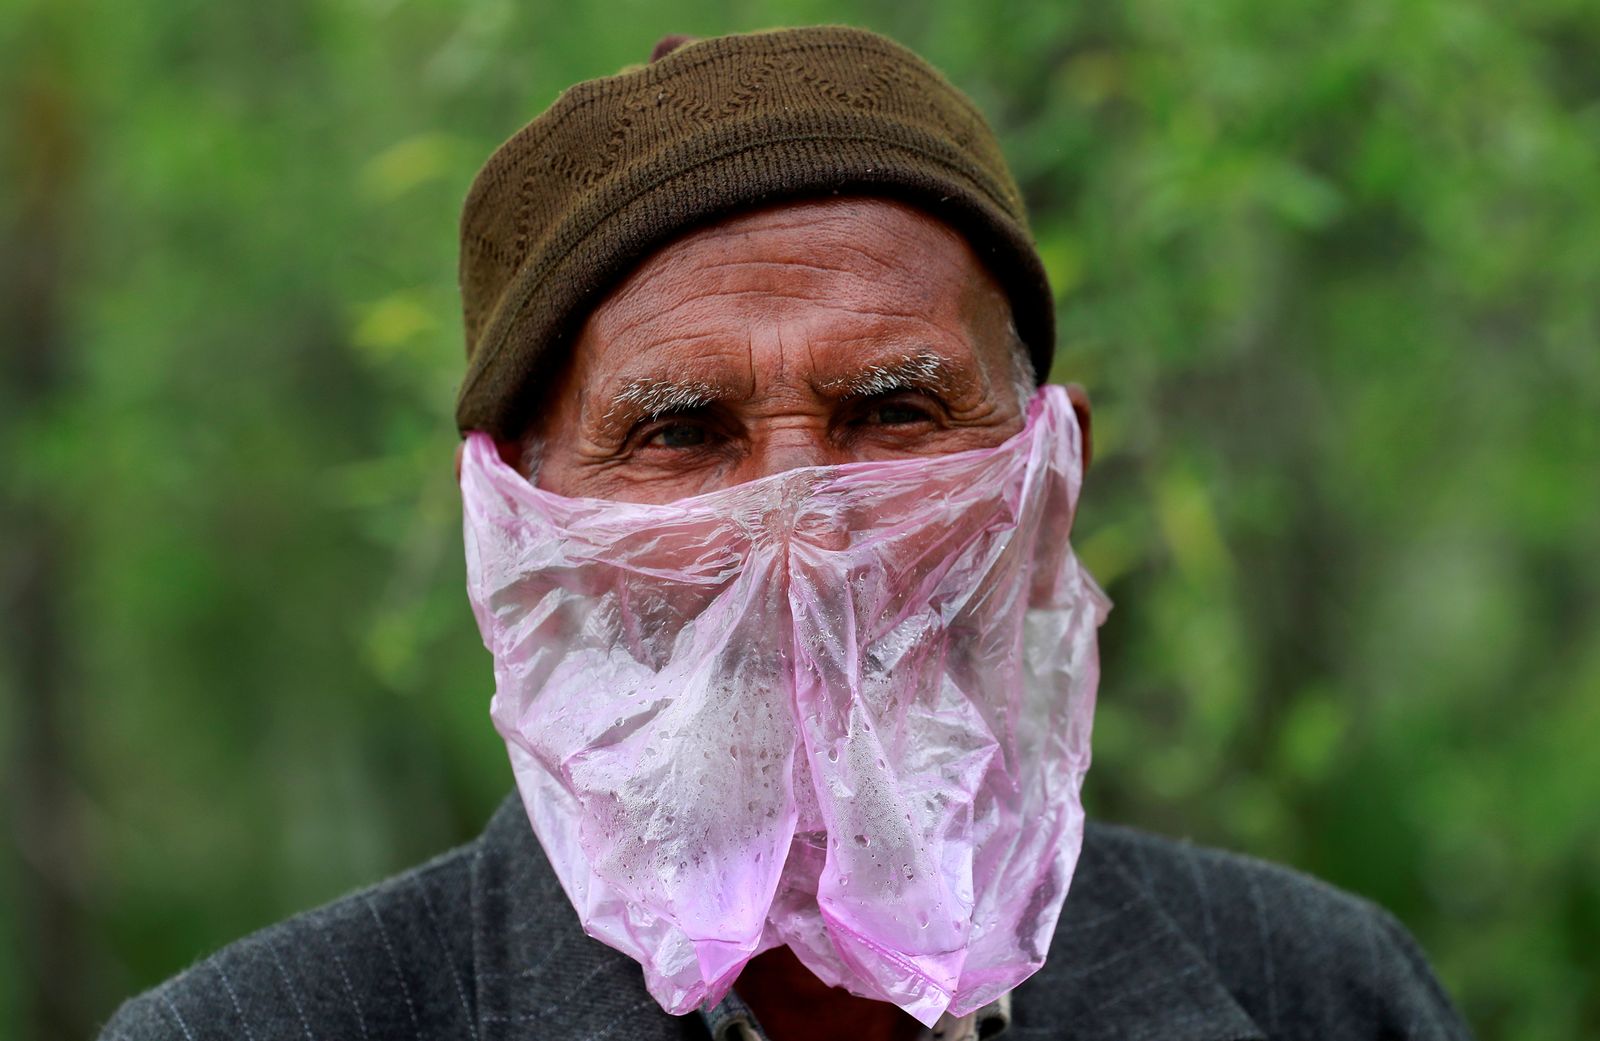 A man uses a plastic bag as a mask amid concerns about the spread of coronavirus disease (COVID-19), in Srinagar April 7, 2020. REUTERS/Danish Ismail     TPX IMAGES OF THE DAY